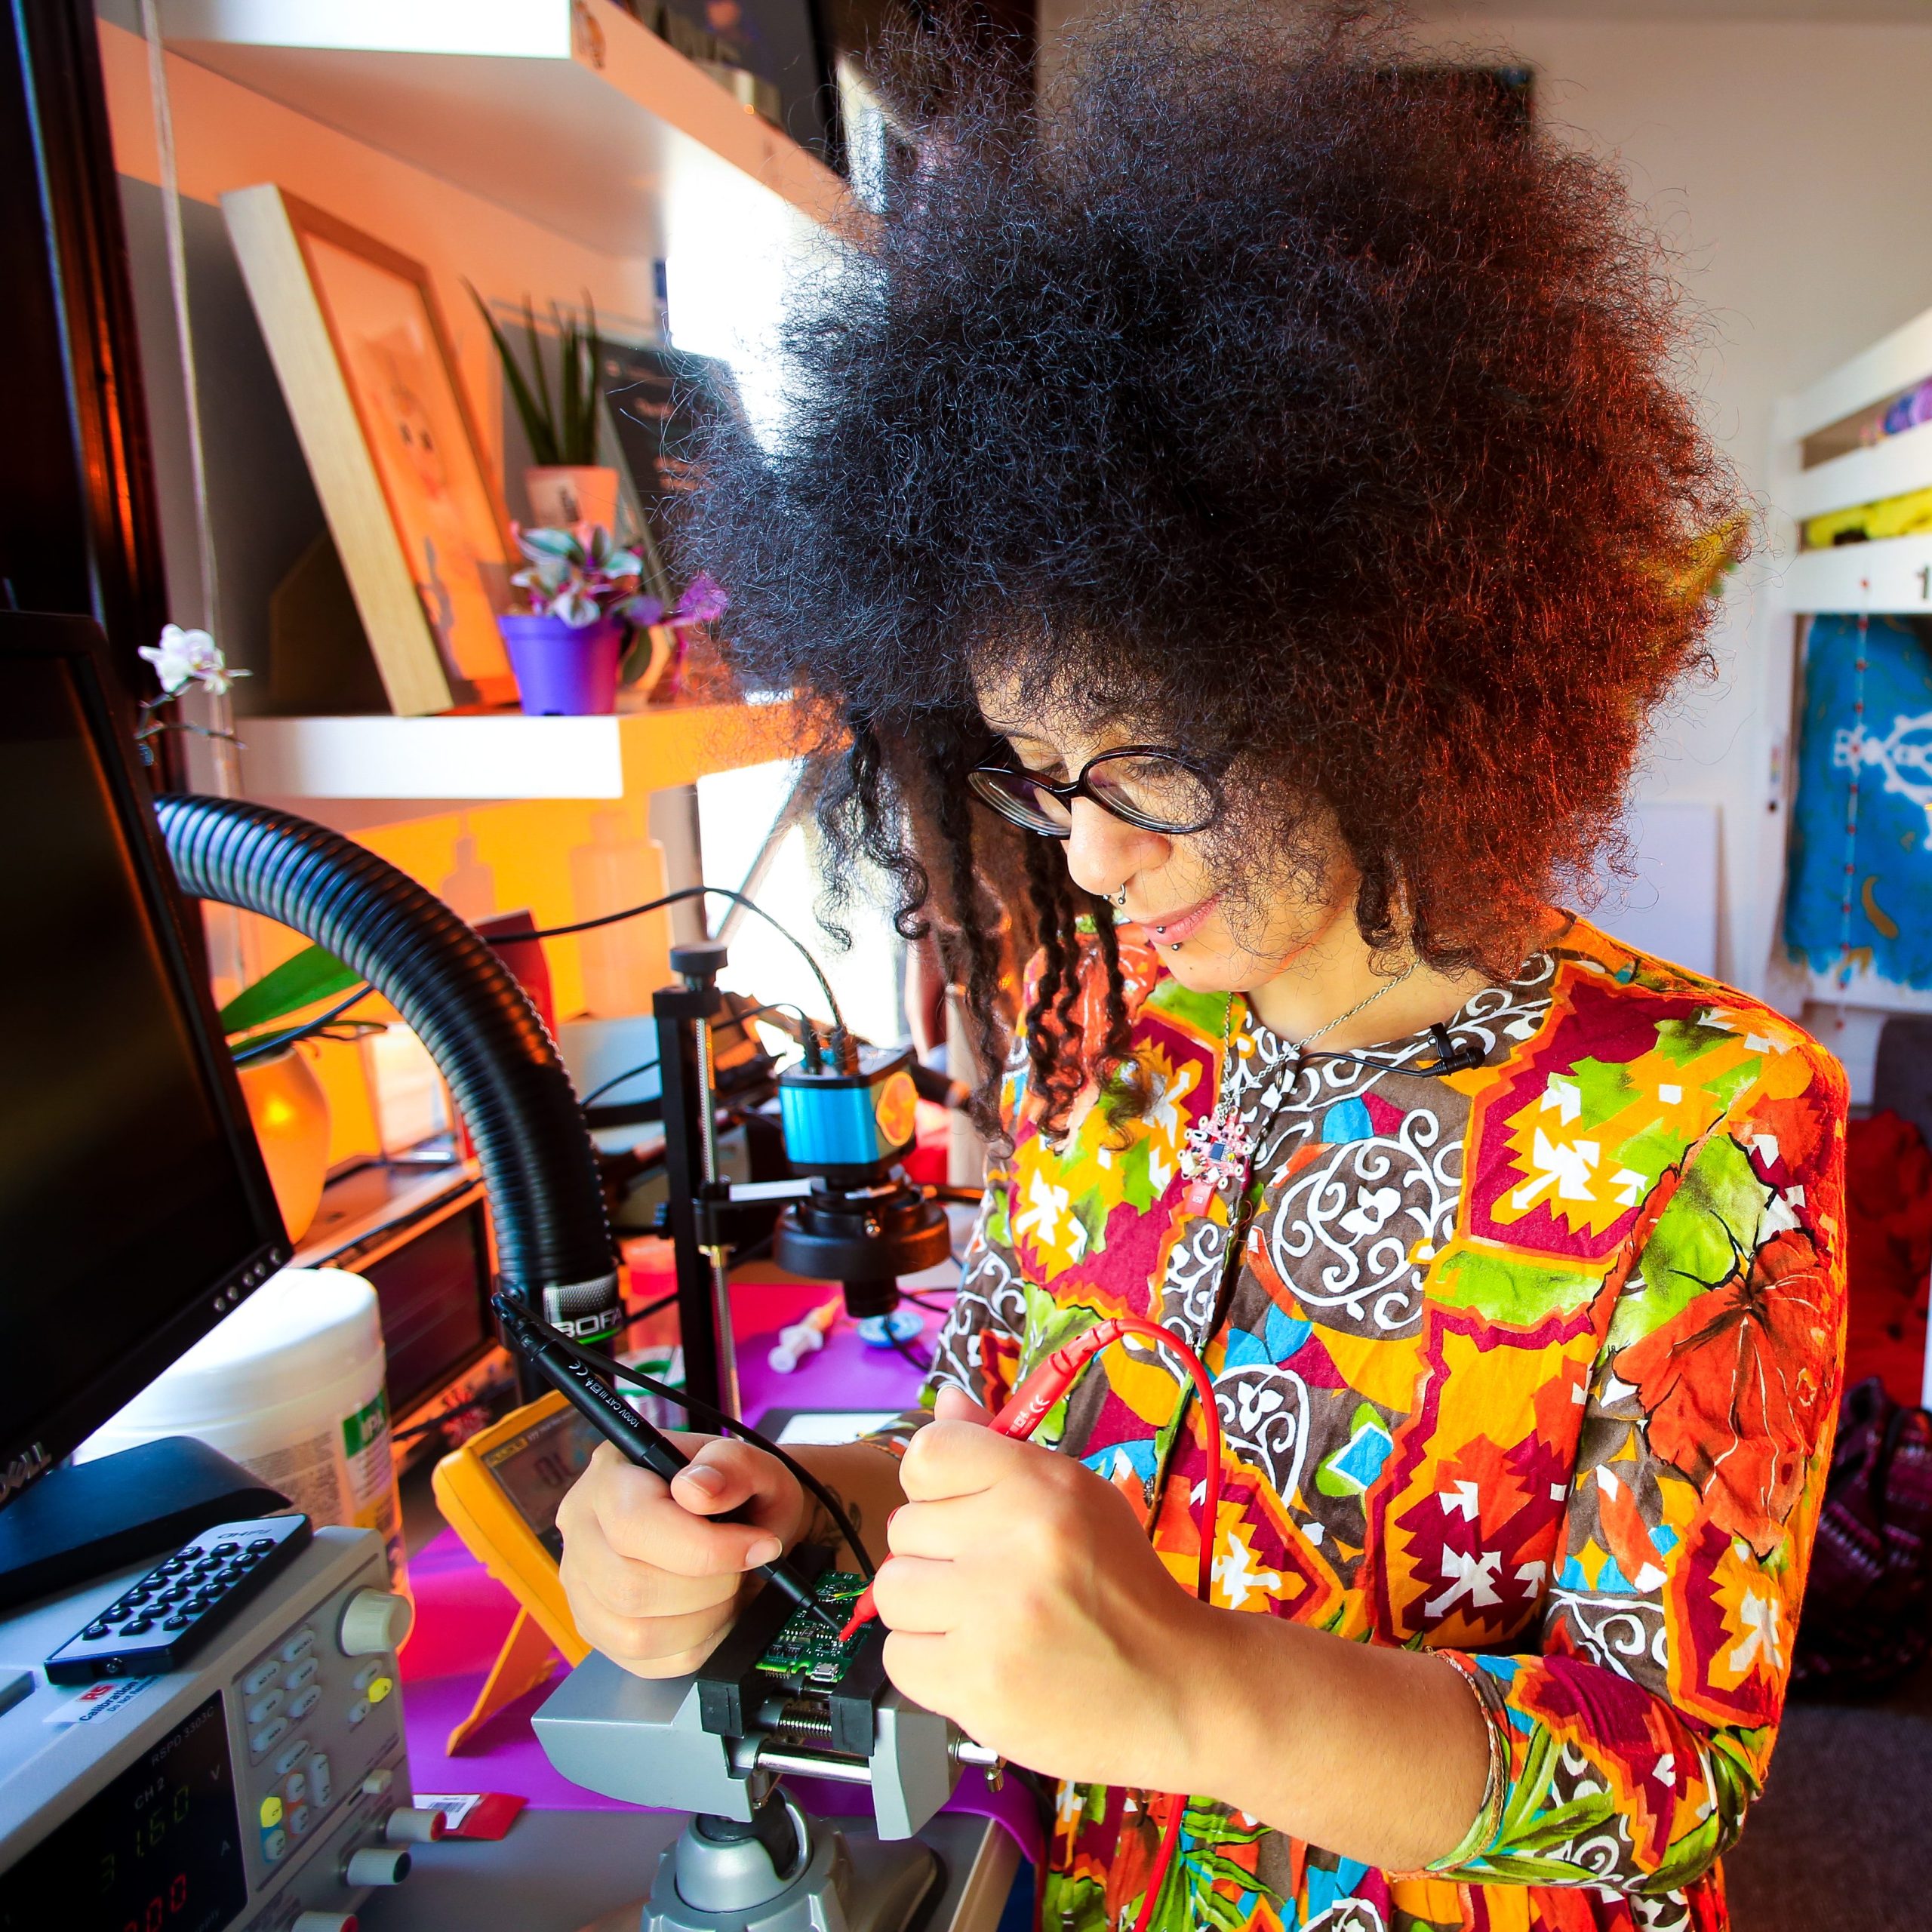 The image shows Shrouk working intently at their colourful and creative electronics lab. Shrouk has an afro hairstyle and is wearing a brightly coloured dress which is mainly deep oranges and reds with intricate patterns. She is working on a printed circuit board with an oscilloscope, seemingly deeply focused on the detailed electronics work or experiment they are engaged in.

Shrouk's workspace has an artistic, energetic vibe, filled with various bright decorations and objects in oranges, pinks, blues and greens that match Shrouk's expressive and unique style. The photograph captures a moment of concentration as Shrouk applies their skills to an electronics project, with the vibrant atmosphere of the lab reflecting Shrouk's creative personality and approach. The setting suggests Shrouk is bringing an imaginative flair to their electronics work.